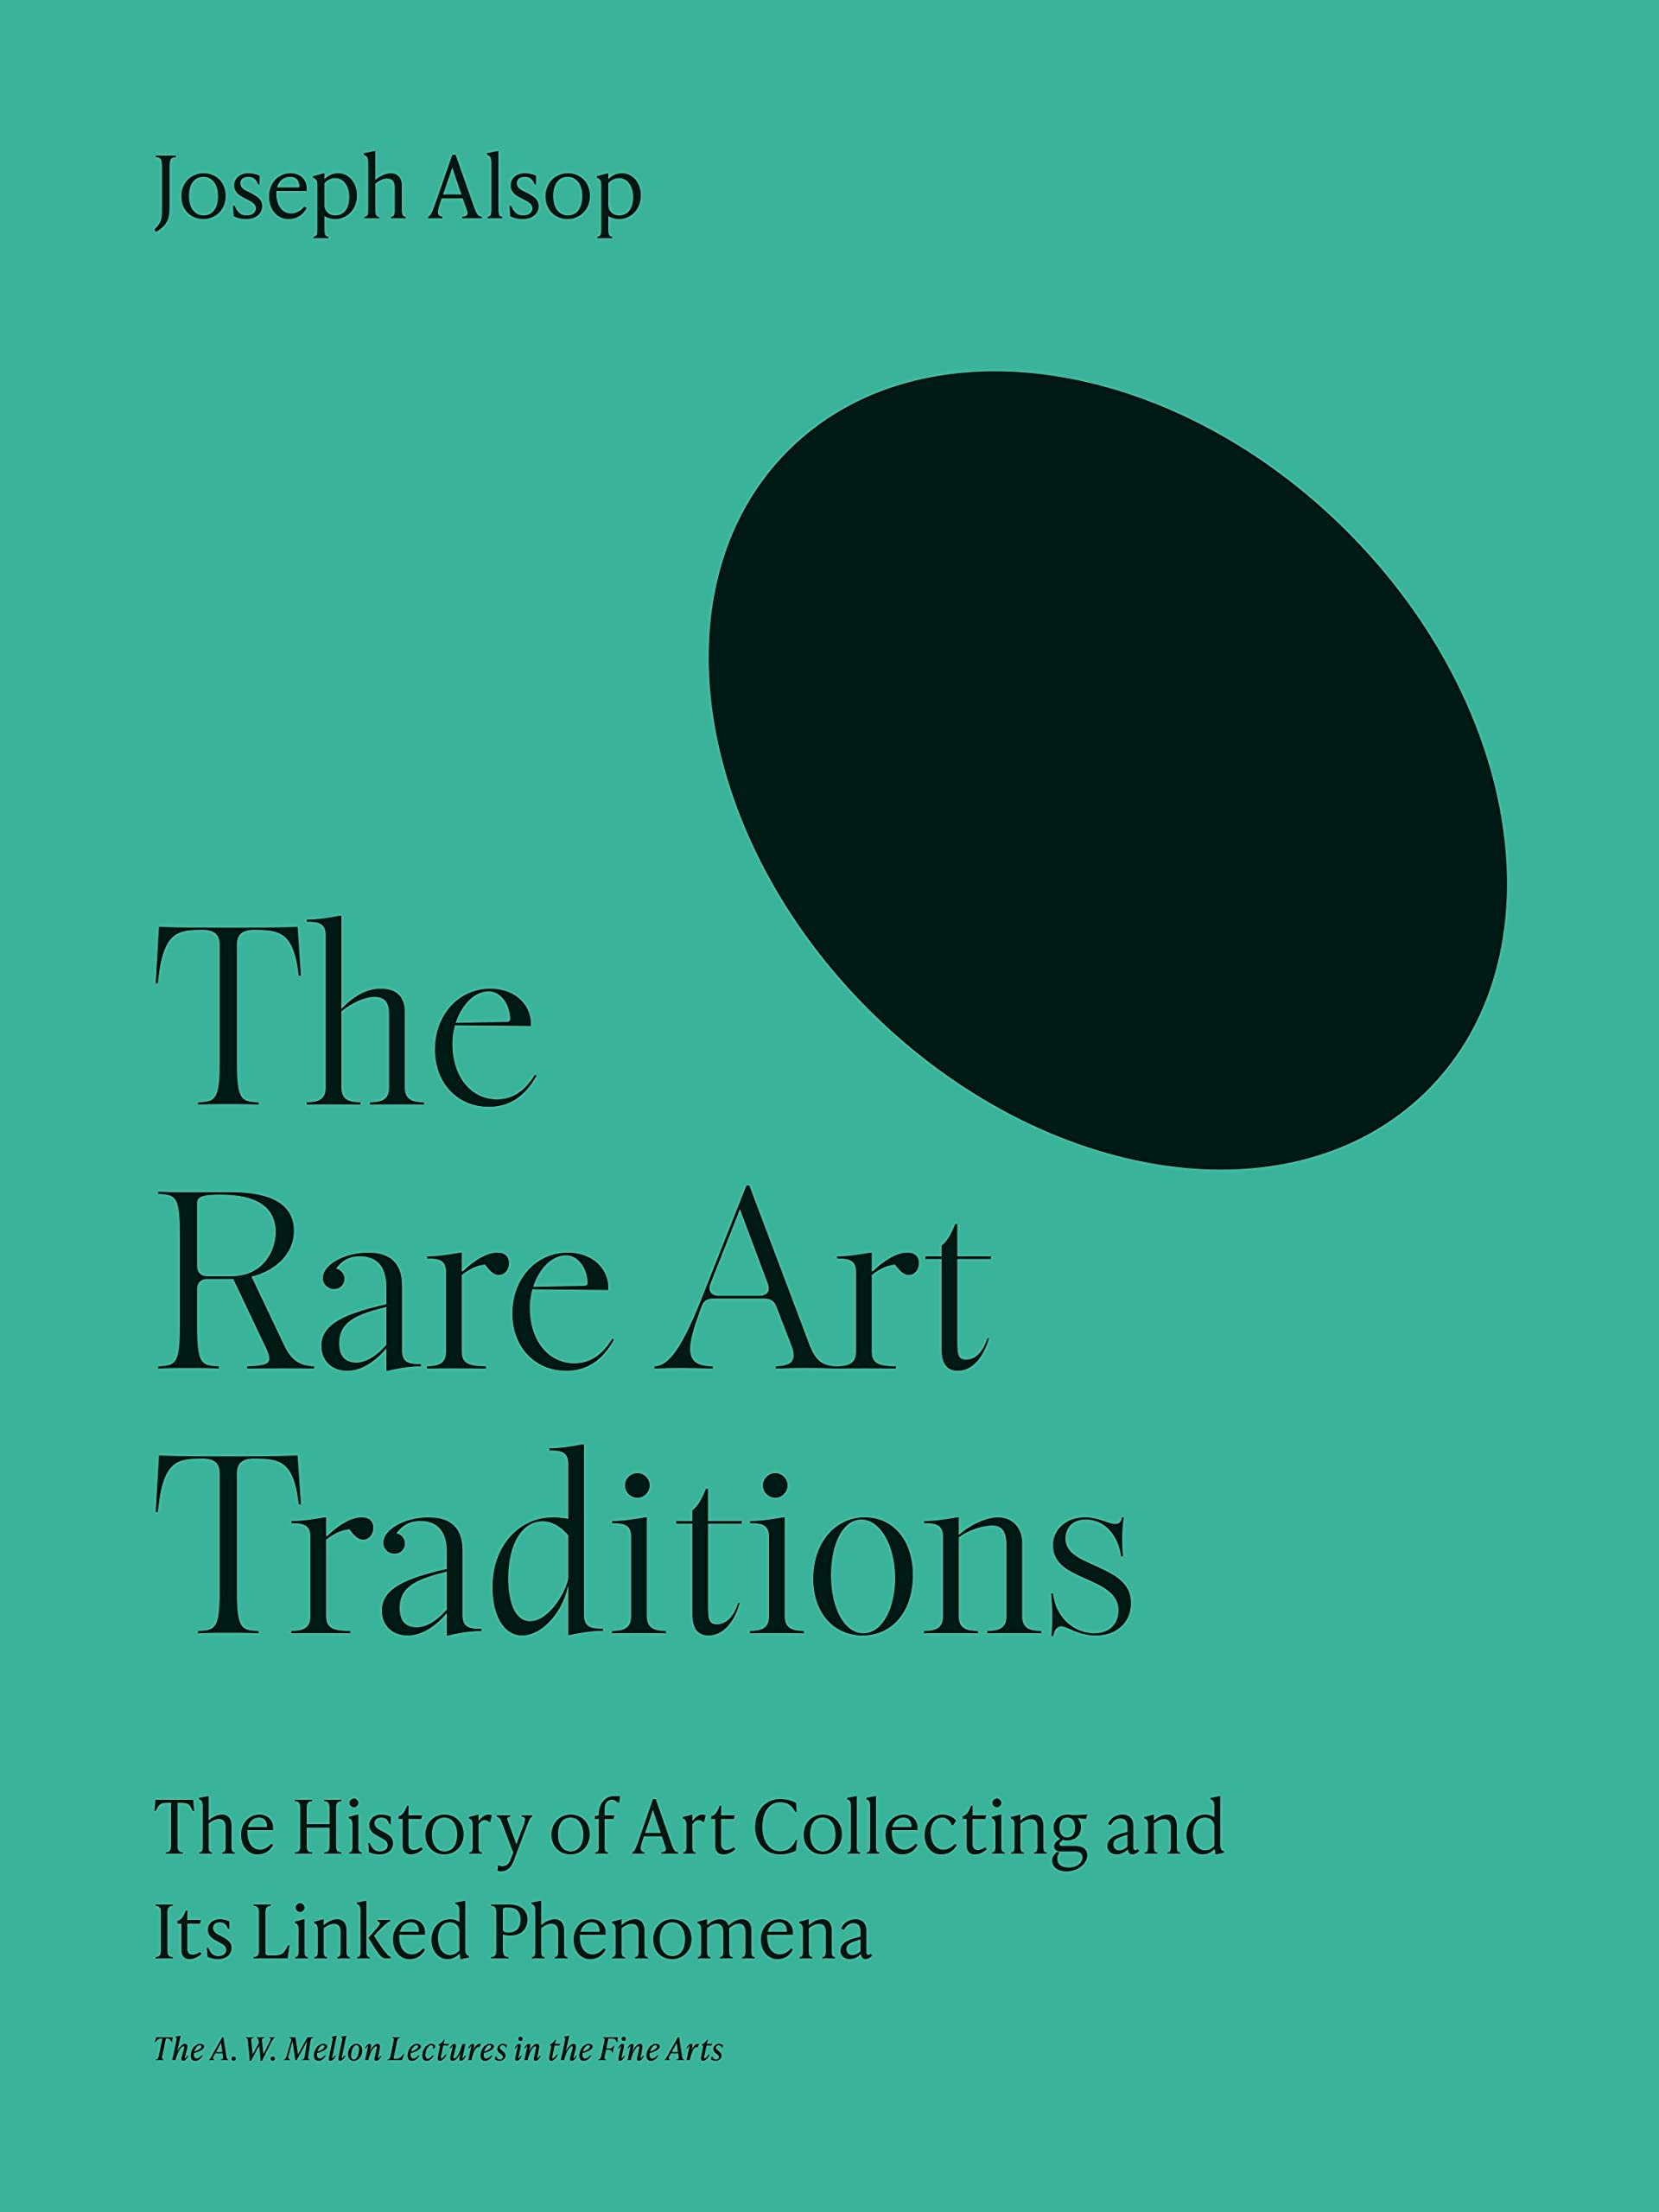 The Rare Art Traditions: The History of Art Collecting and Its Linked Phenomena (The A. W. Mellon Lectures in the Fine Arts Book 27)